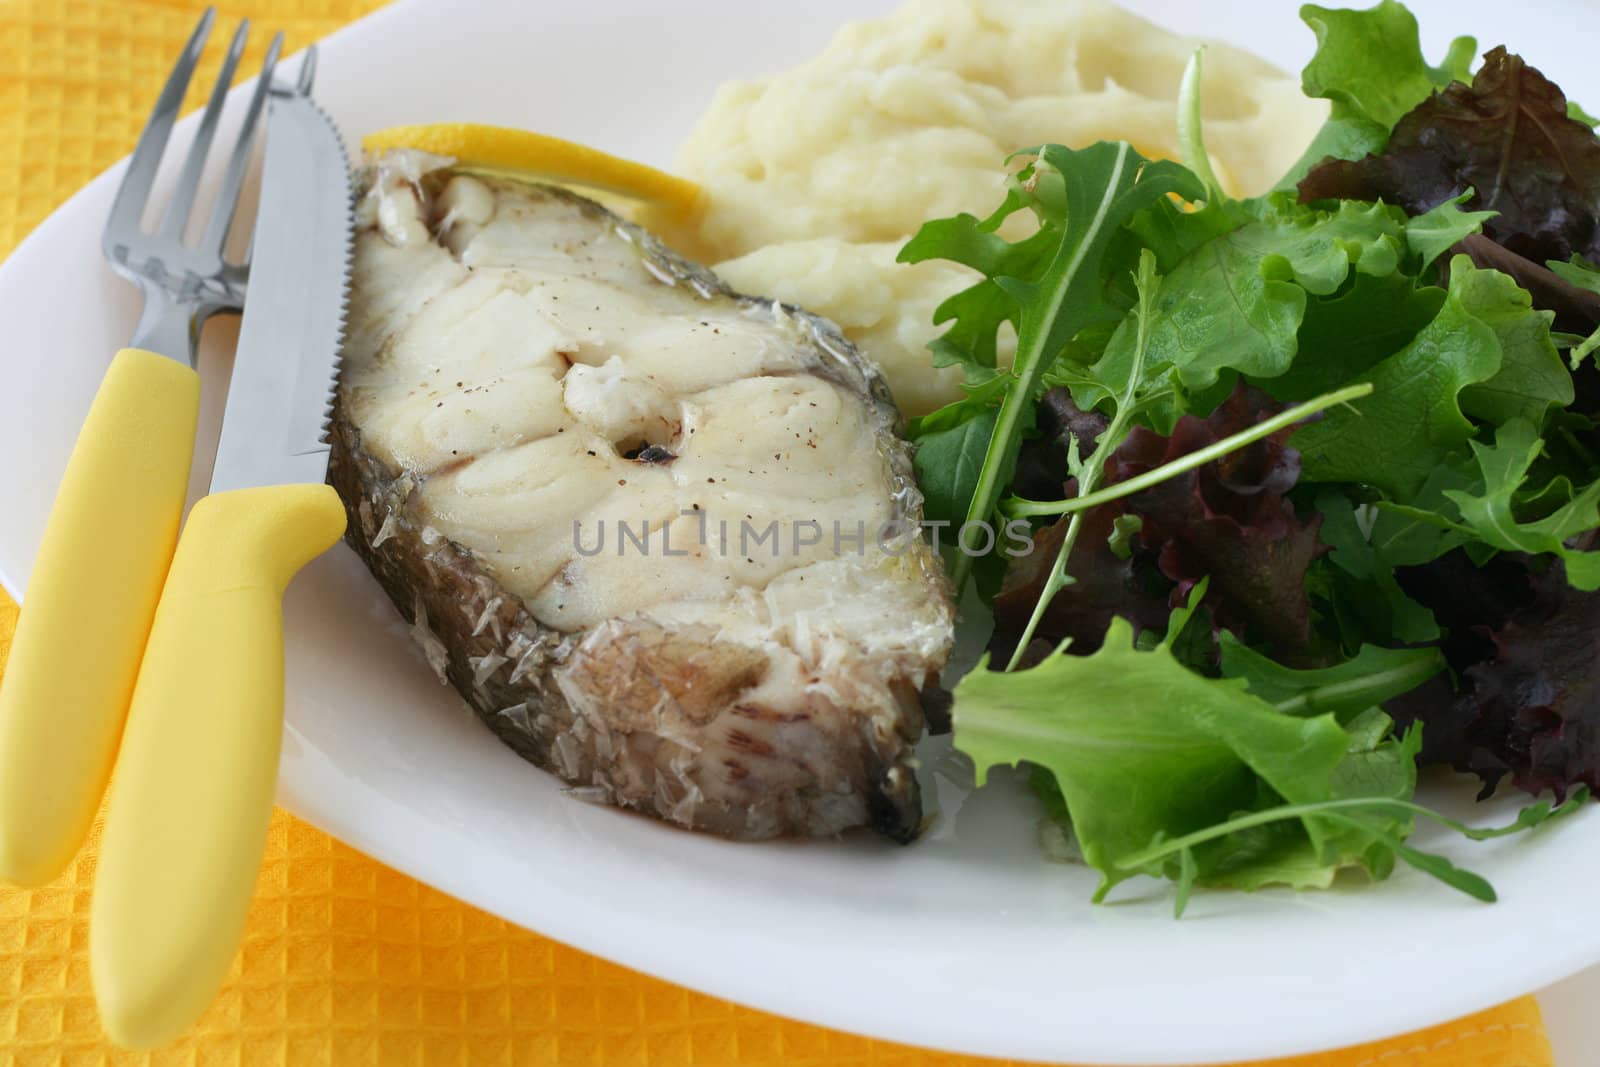 boiled fish with mashed potato